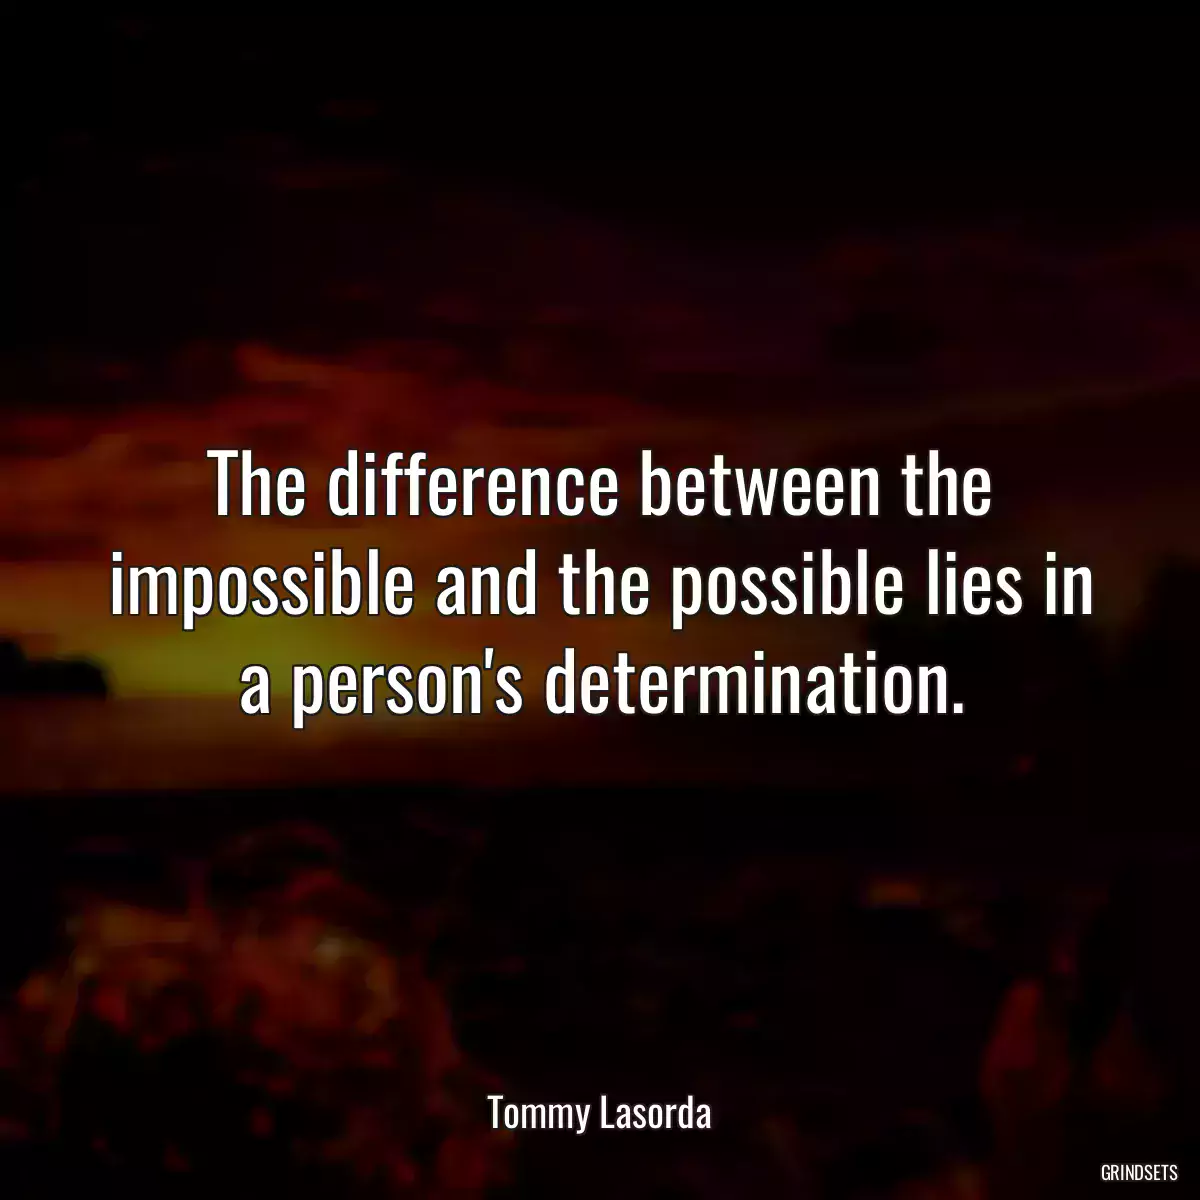 The difference between the impossible and the possible lies in a person\'s determination.